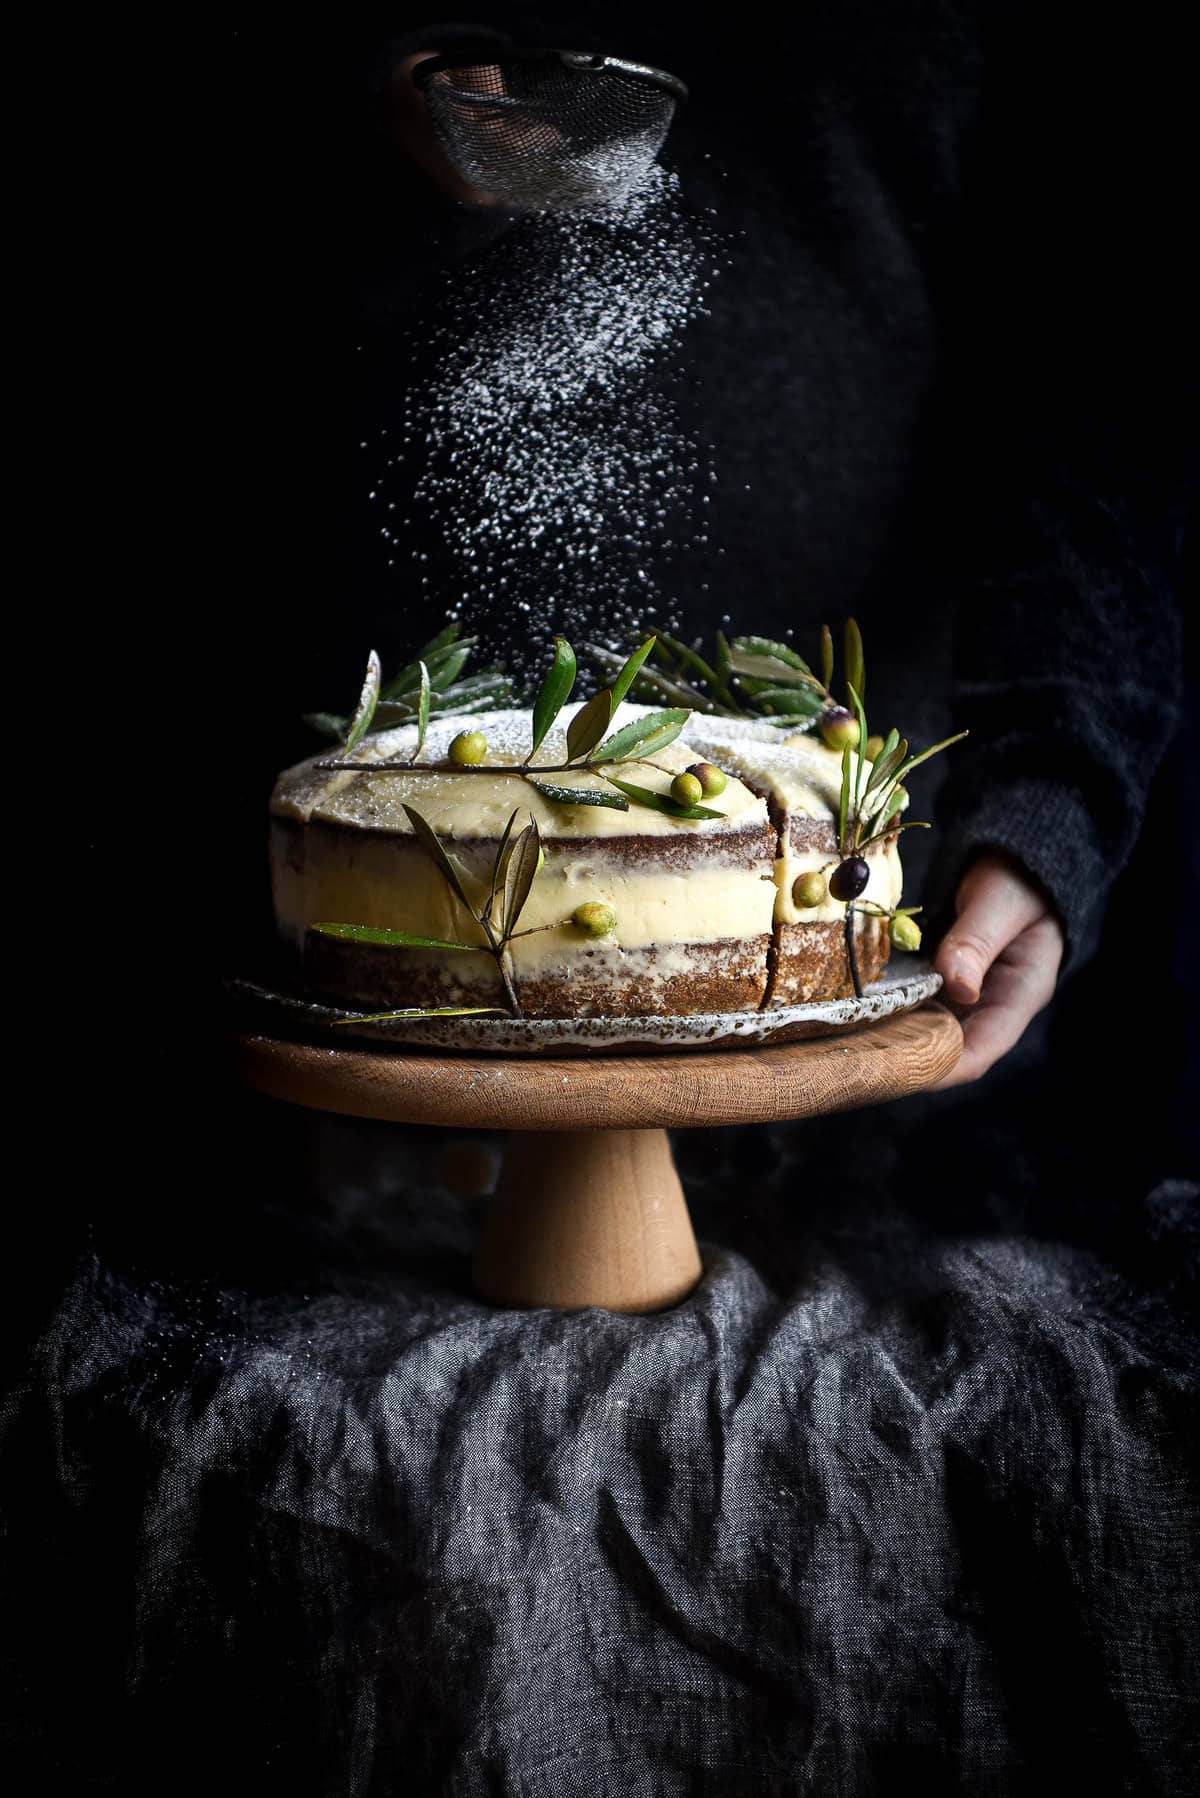 A side on view of a gluten free carrot cake on a wooden stand against a dark backdrop. A person stands behind the cake and sprinkles icing down onto the cake. The cake is covered in lactose free cream cheese icing and decorated with olive branches